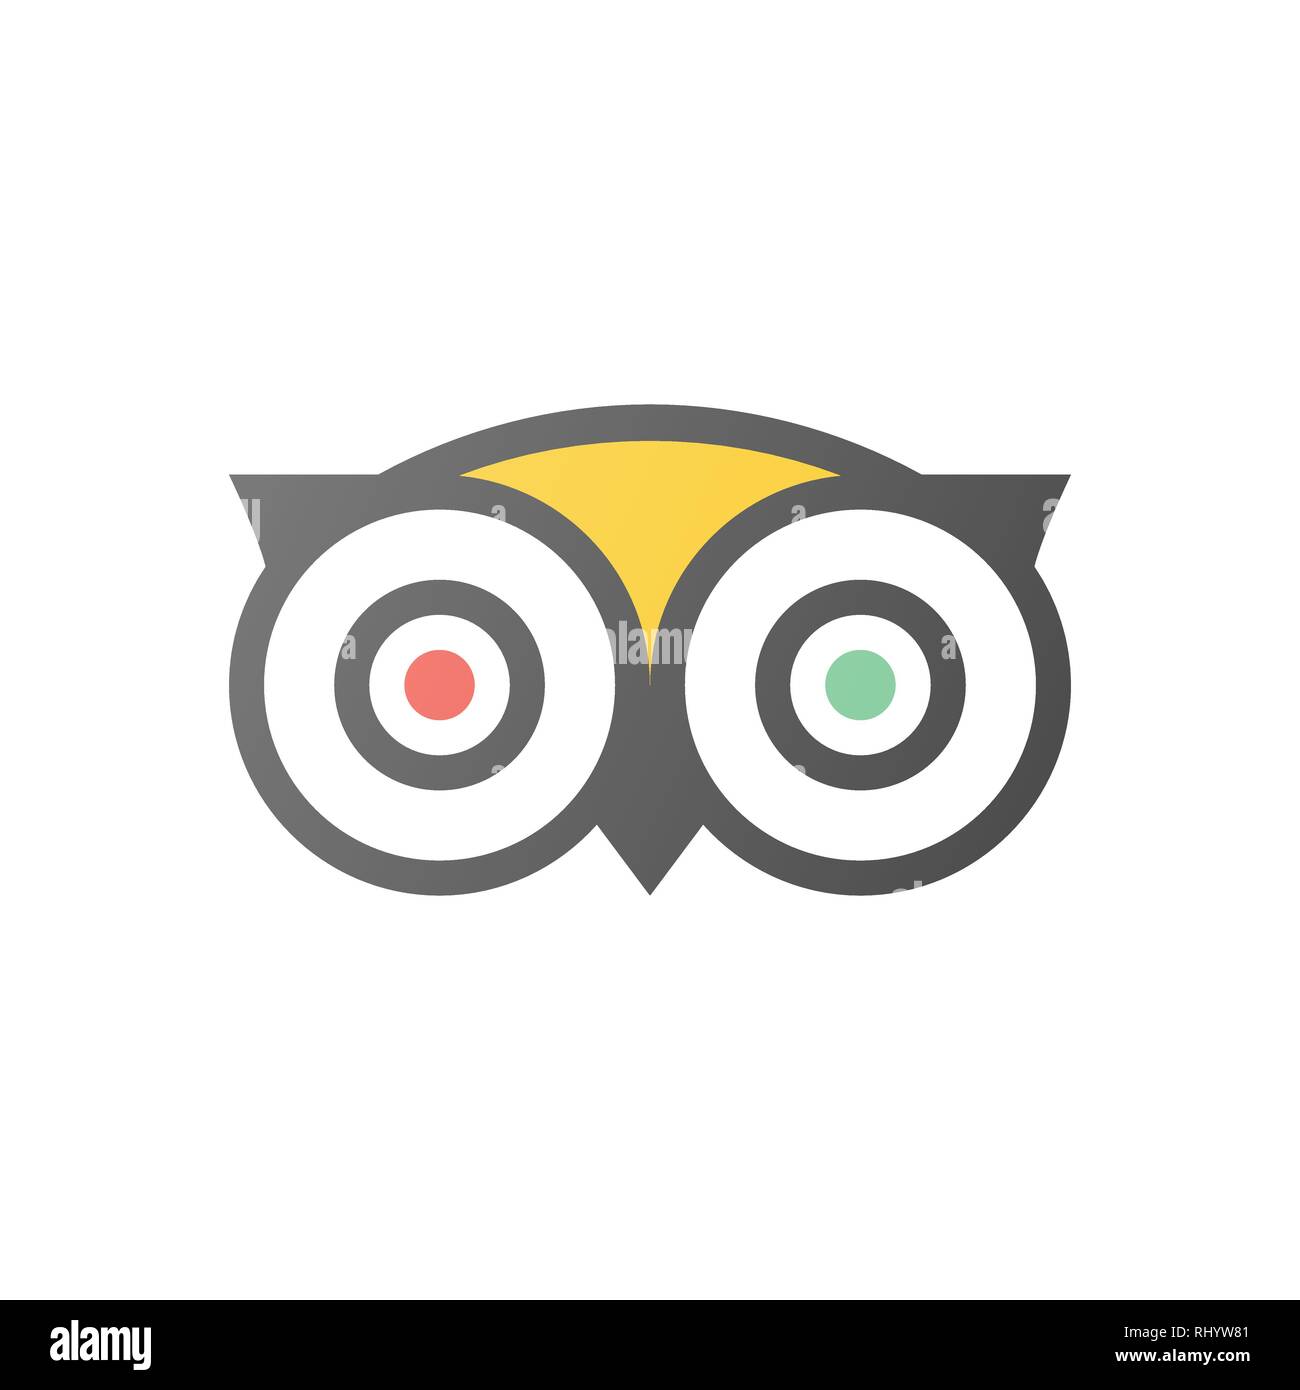 Tripadvisor logo icon vector - popular service with rating of hotels and attractions for travel. Stock Vector